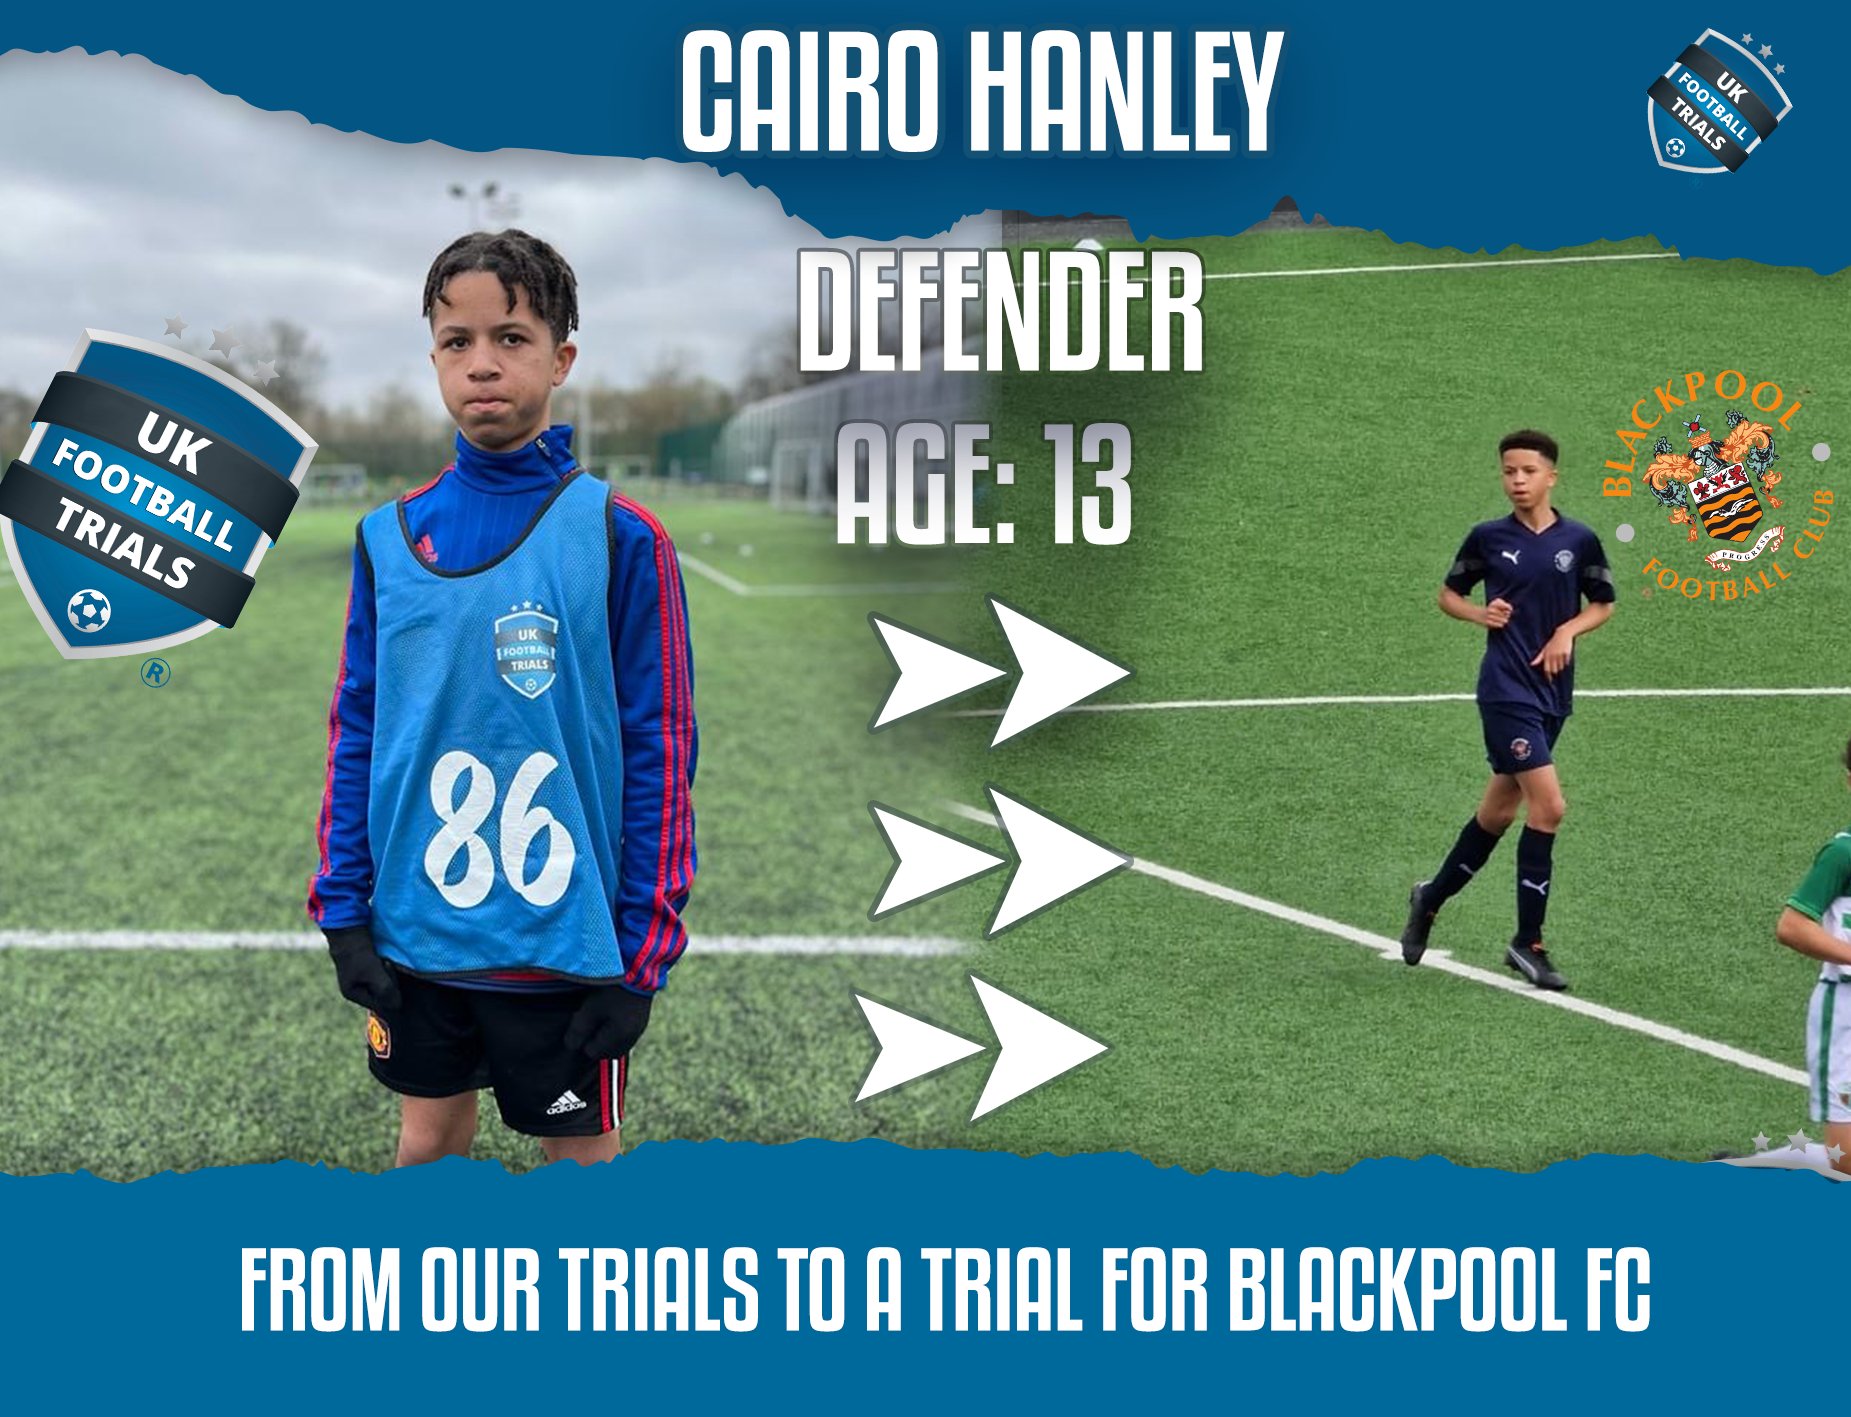 Cairo Hanley - Age 13 - Trial at Blackpool FC